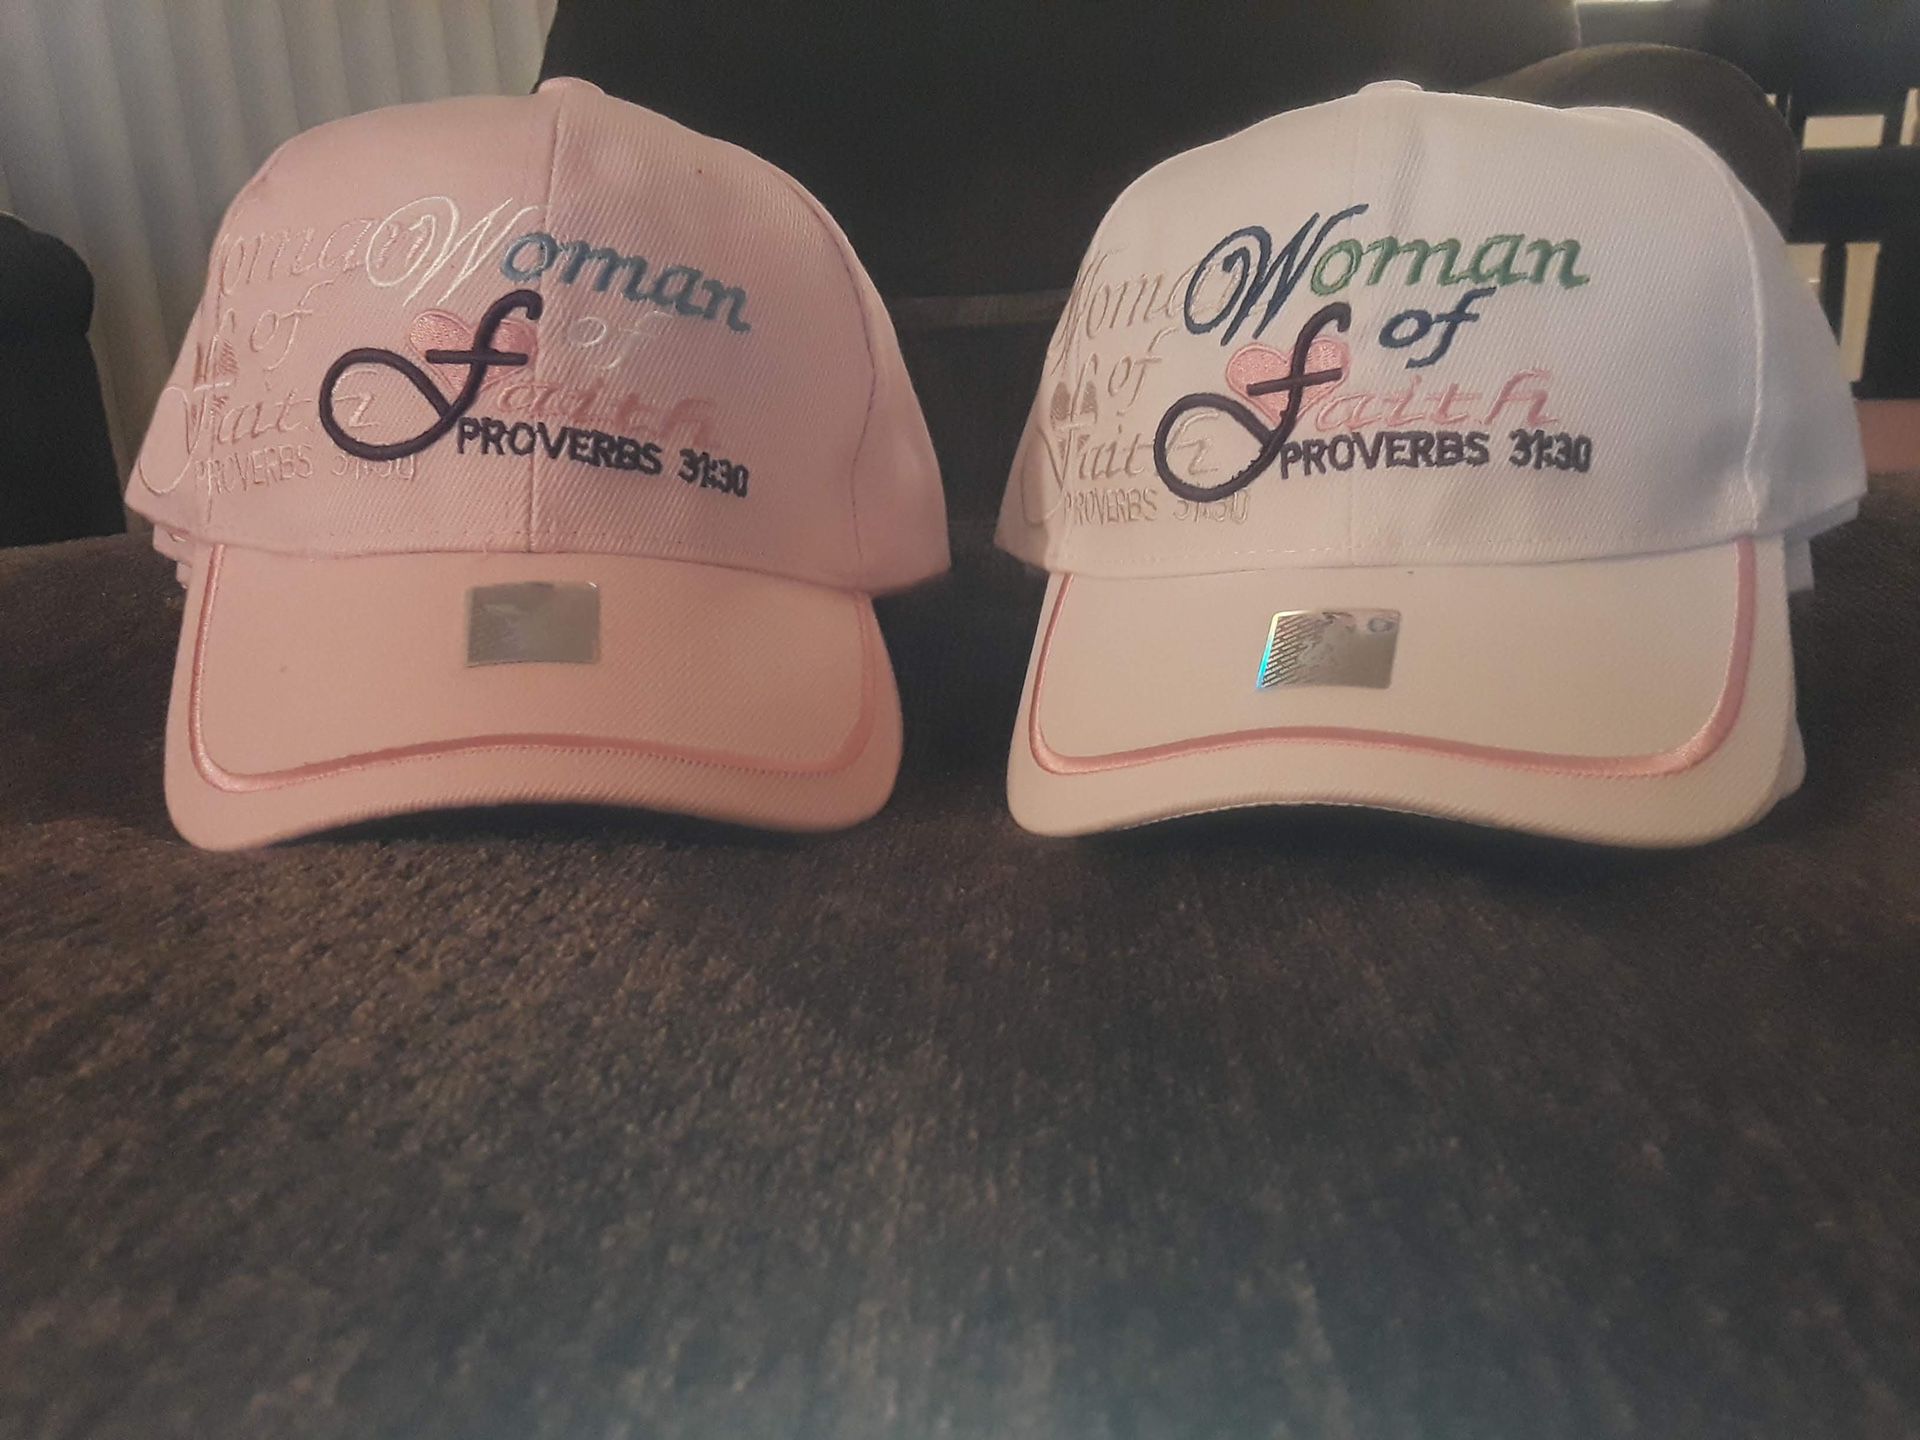 Christen Hats And T Shirts